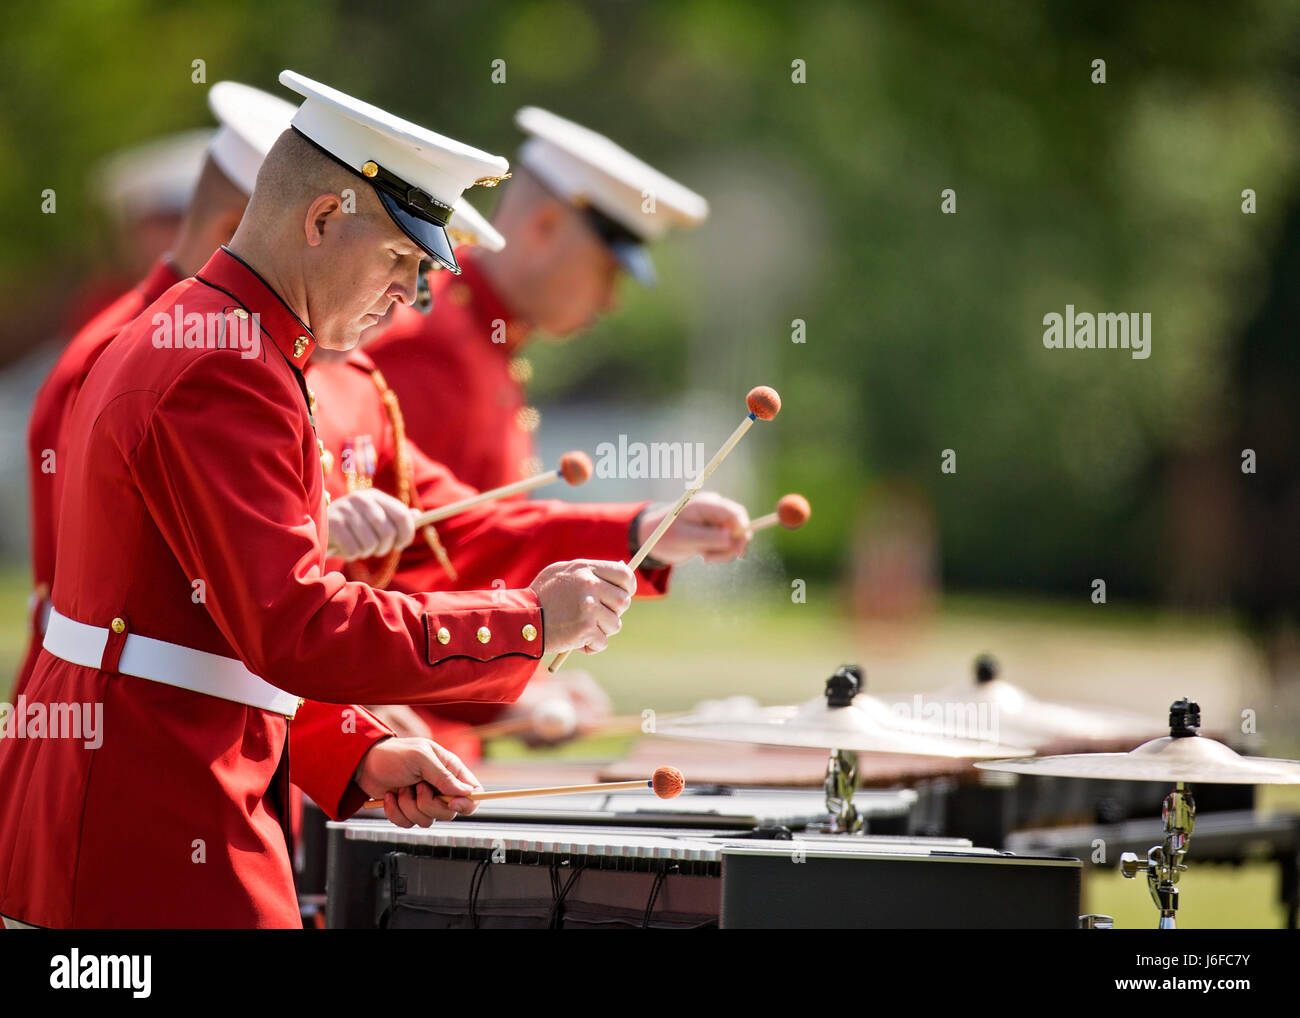 Members of the U.S. Marine Drum & Bugle Corps perform during the Centennial Celebration Ceremony at Lejeune Field, Marine Corps Base (MCB) Quantico, Va., May 10, 2017. The event commemorates the founding of MCB Quantico in 1917, and consisted of performances by the U.S. Marine Corps Silent Drill Platoon and the U.S. Marine Drum & Bugle Corps. (U.S. Marine Corps photo by James H. Frank) Stock Photo